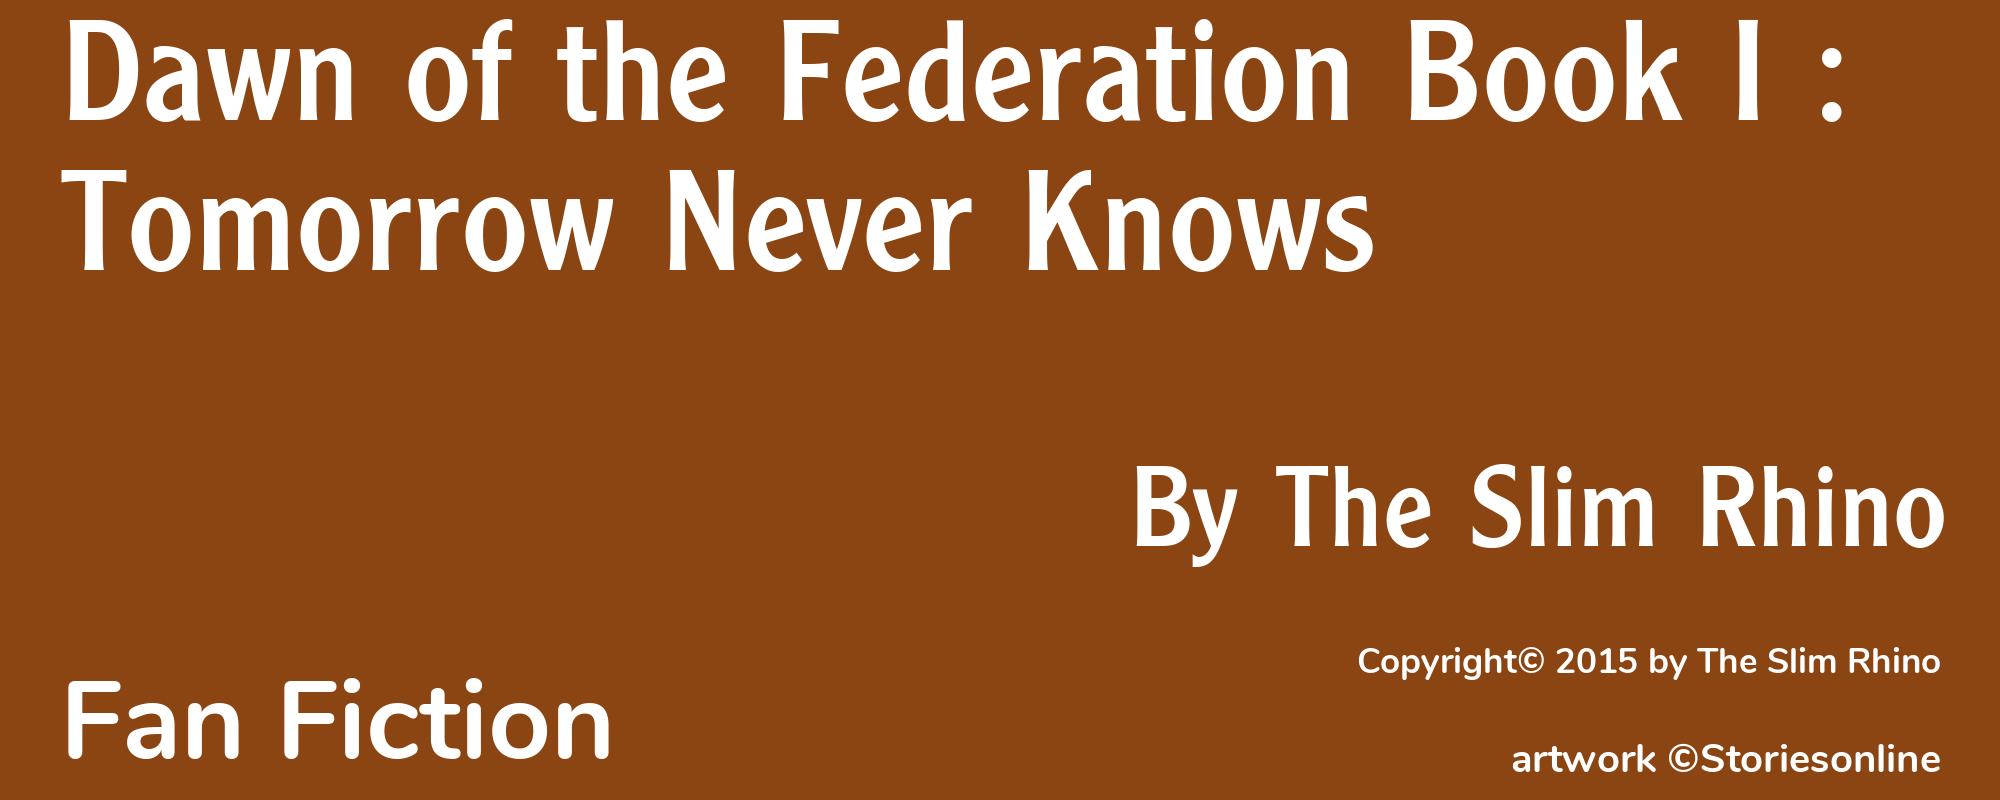 Dawn of the Federation Book I : Tomorrow Never Knows - Cover